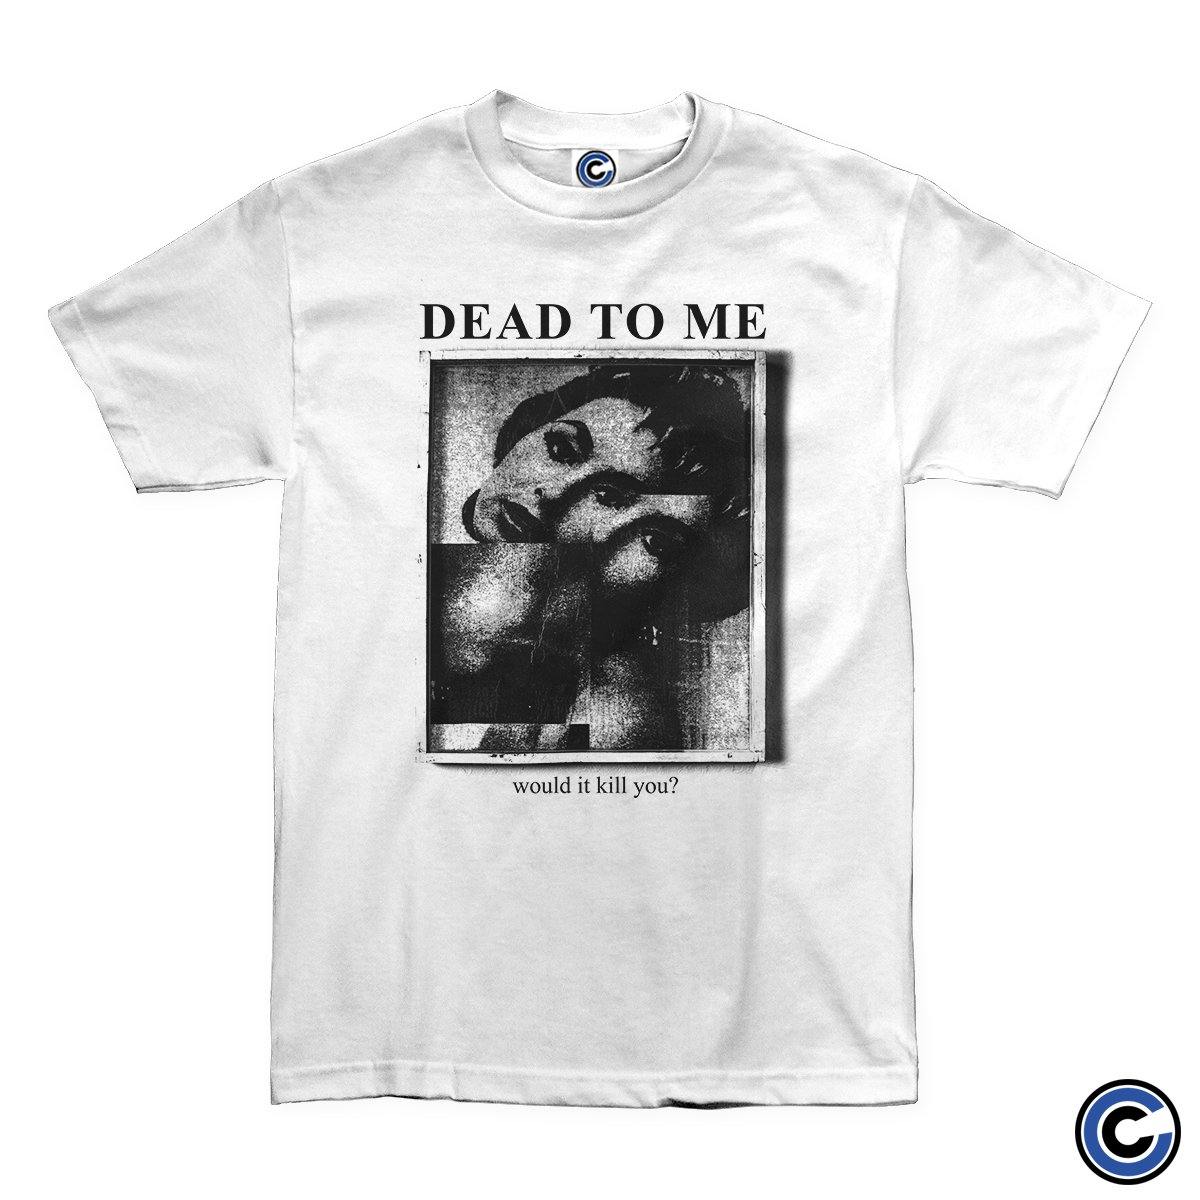 Buy – Dead To Me "Would It Kill You" Shirt – Band & Music Merch – Cold Cuts Merch